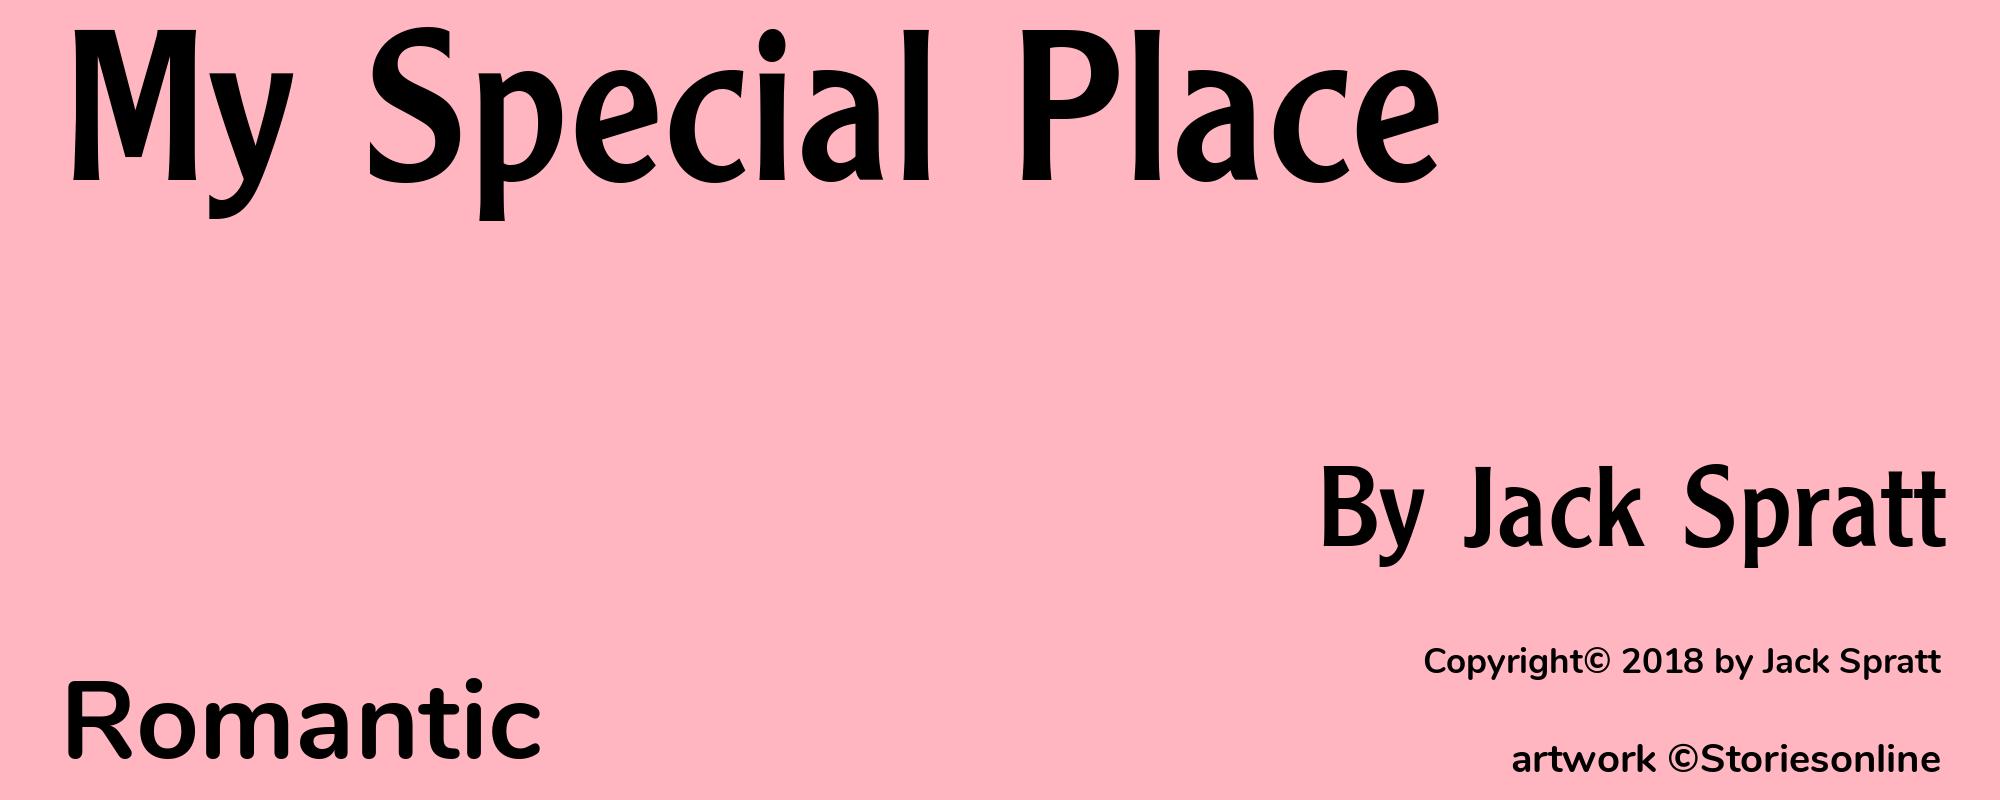 My Special Place - Cover